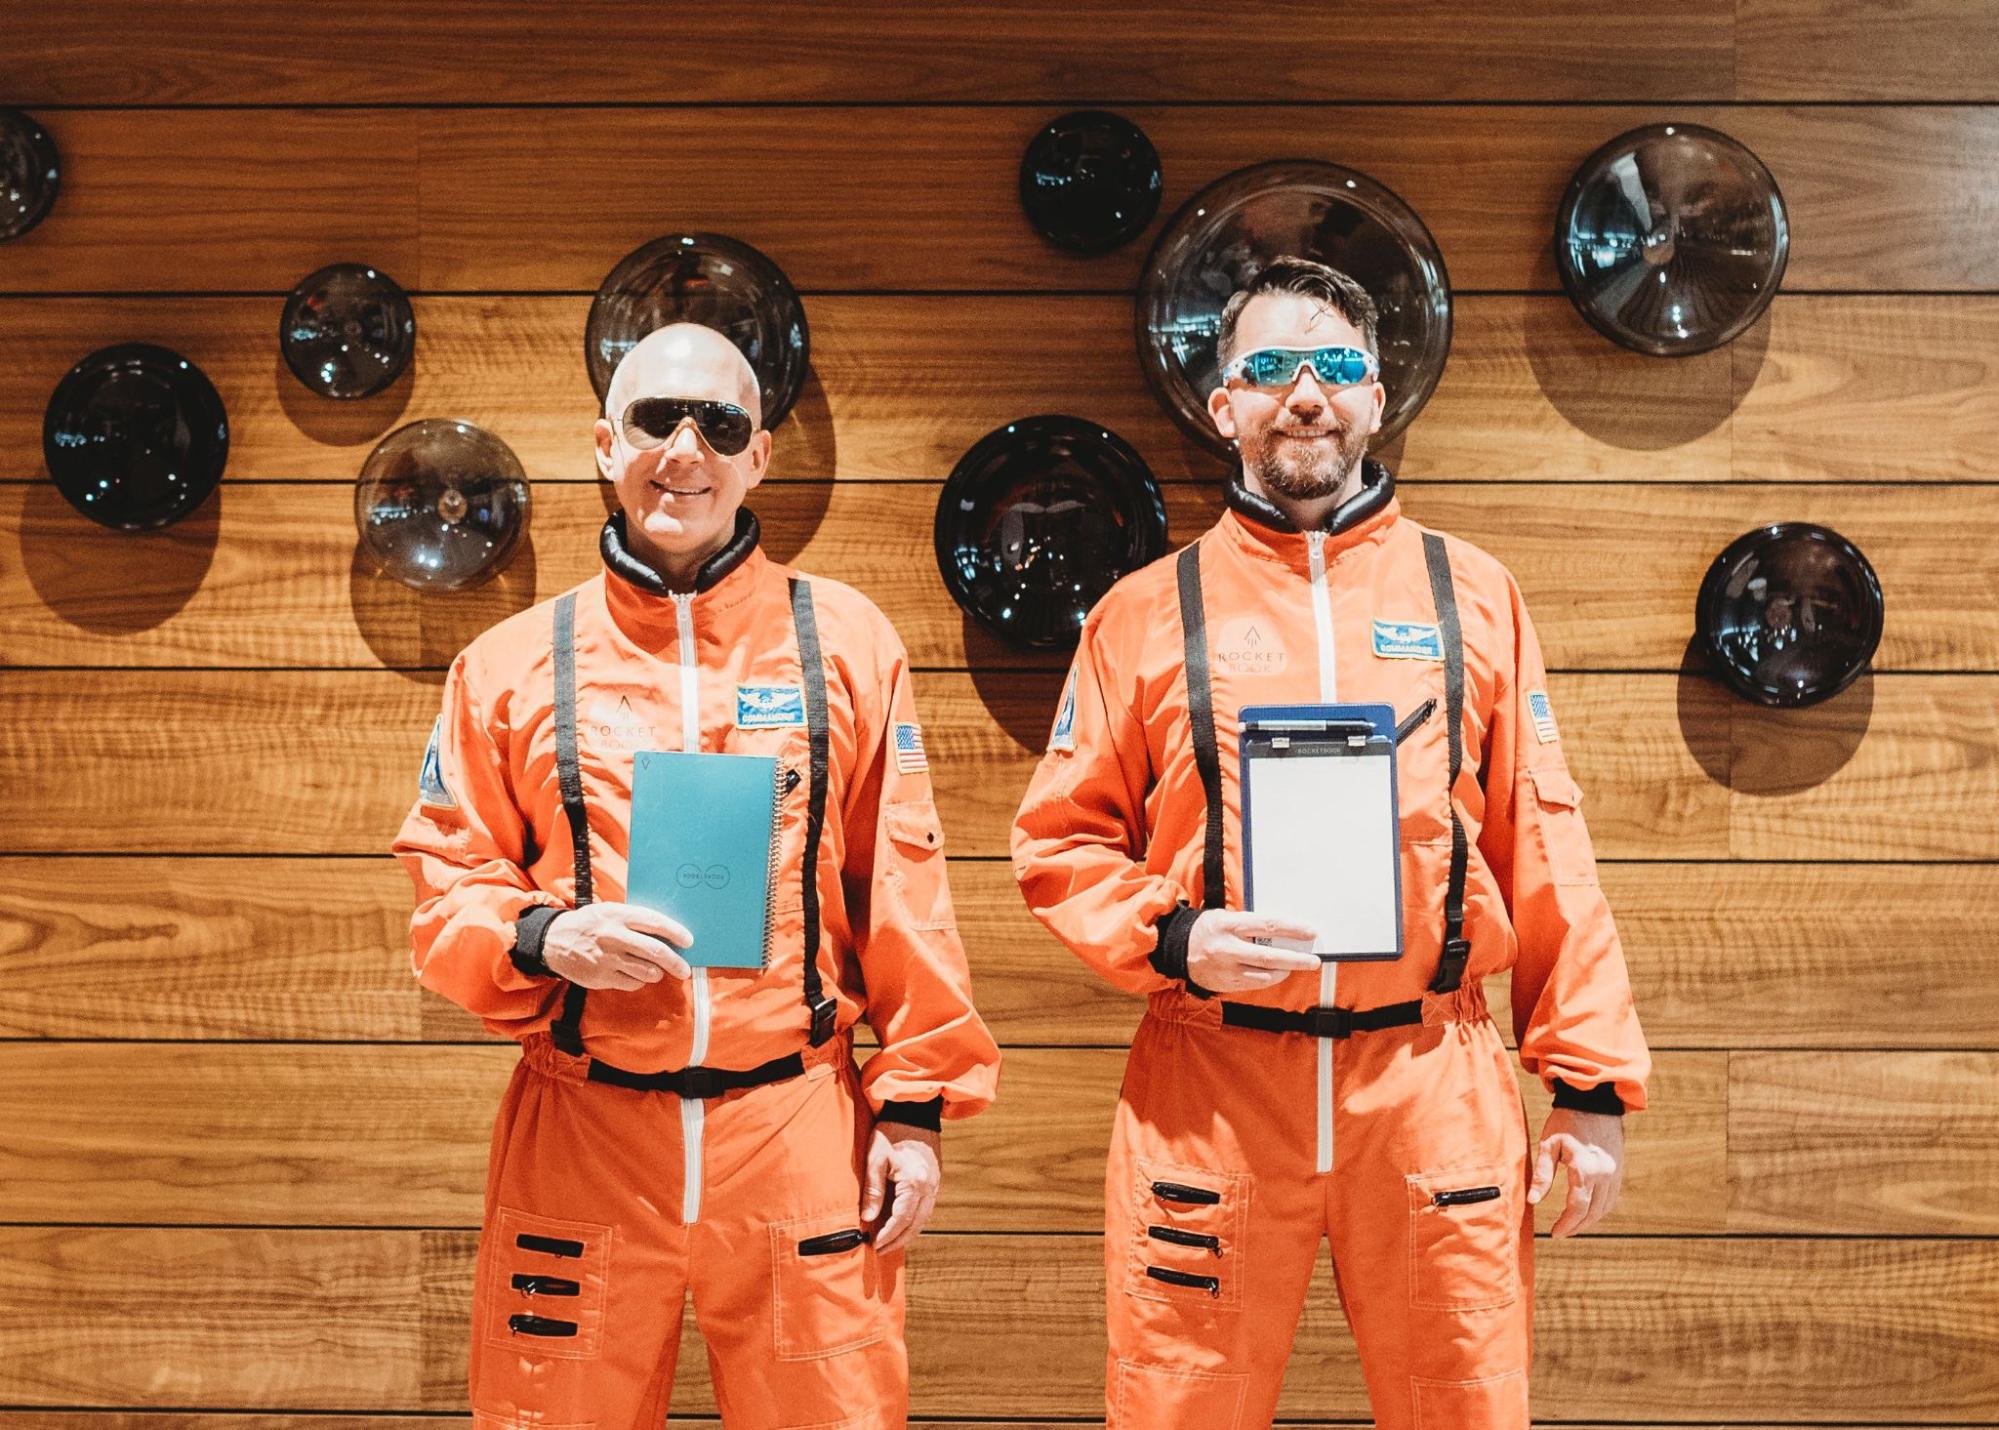  Joe Lamey and Jake Epstein in their astronaut suits and Rockebooks. 